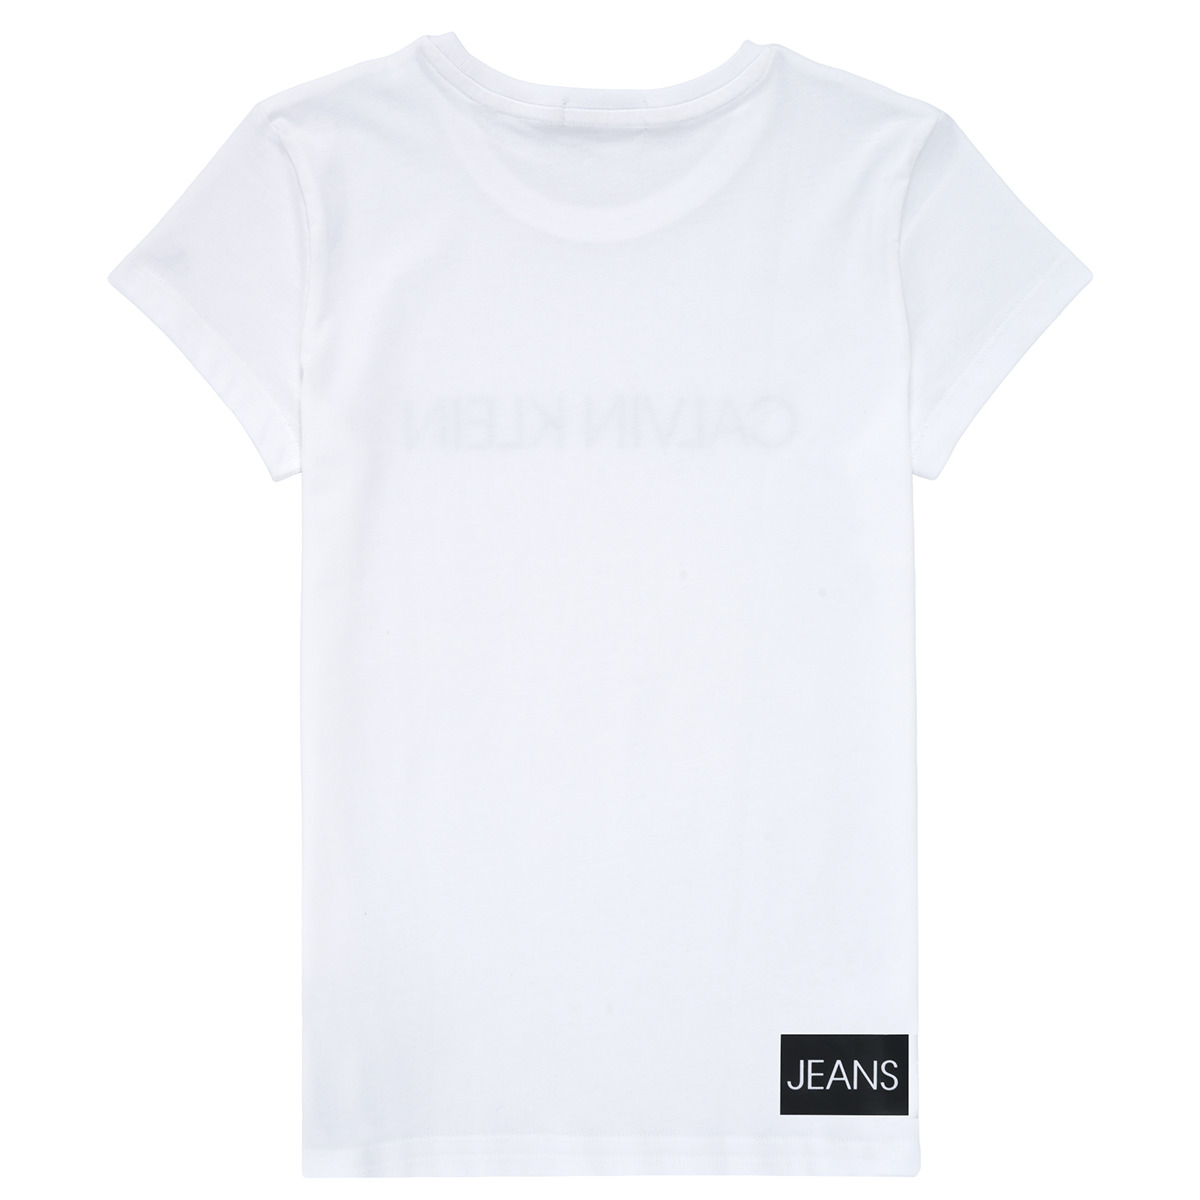 Calvin Klein Jeans Blanc INSTITUTIONAL T-SHIRT 9EiaxybO